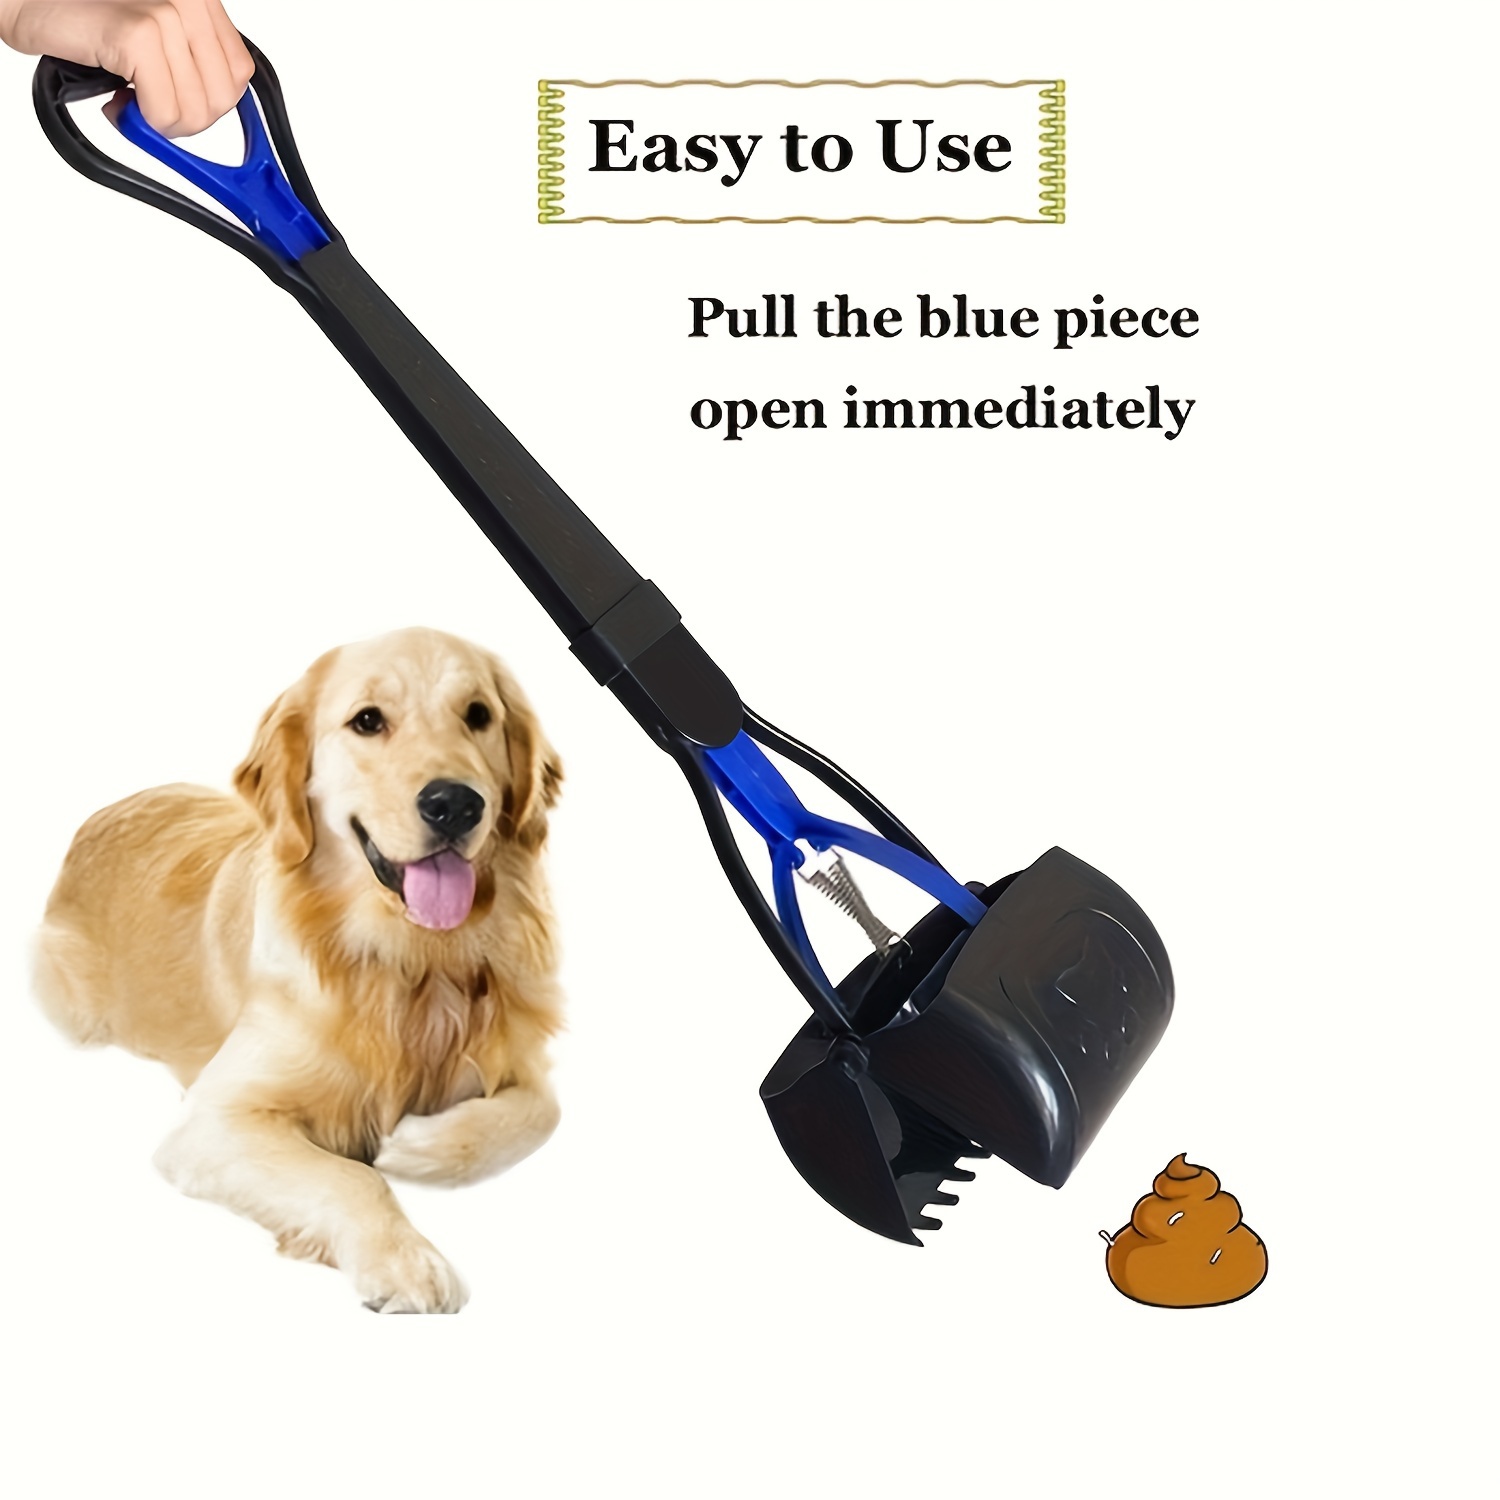 

Pet Dog Pooper Scooper, Durable Dog Poop Picker For Outdoor Walking, Portable Dog Excrement Shovel Picker For Dog Outdoor Cleaning Supplies